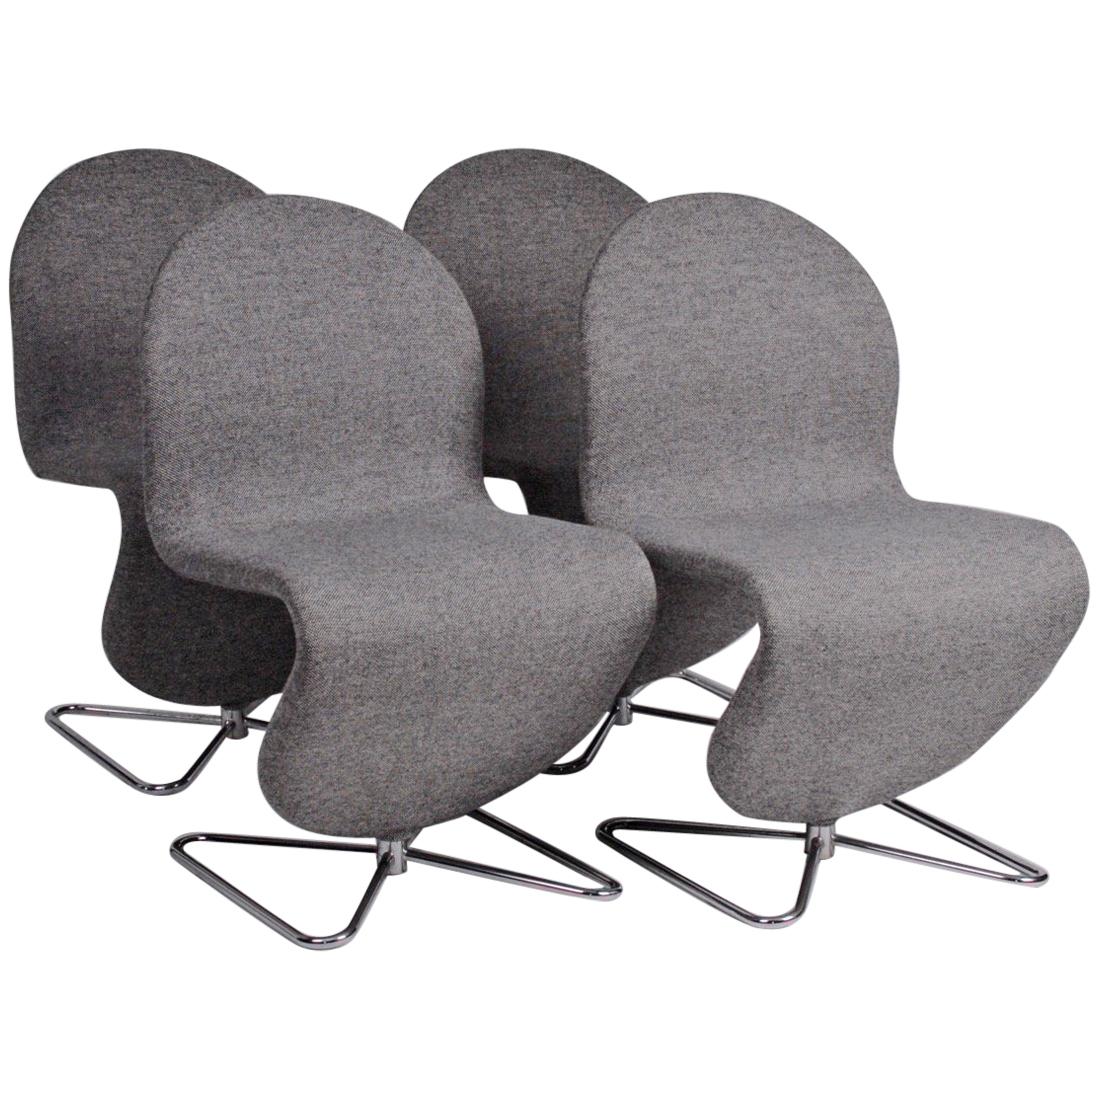 Space Age Verner Panton Set of Four Chairs 123 Serie Fritz Hansen Wool Fabric